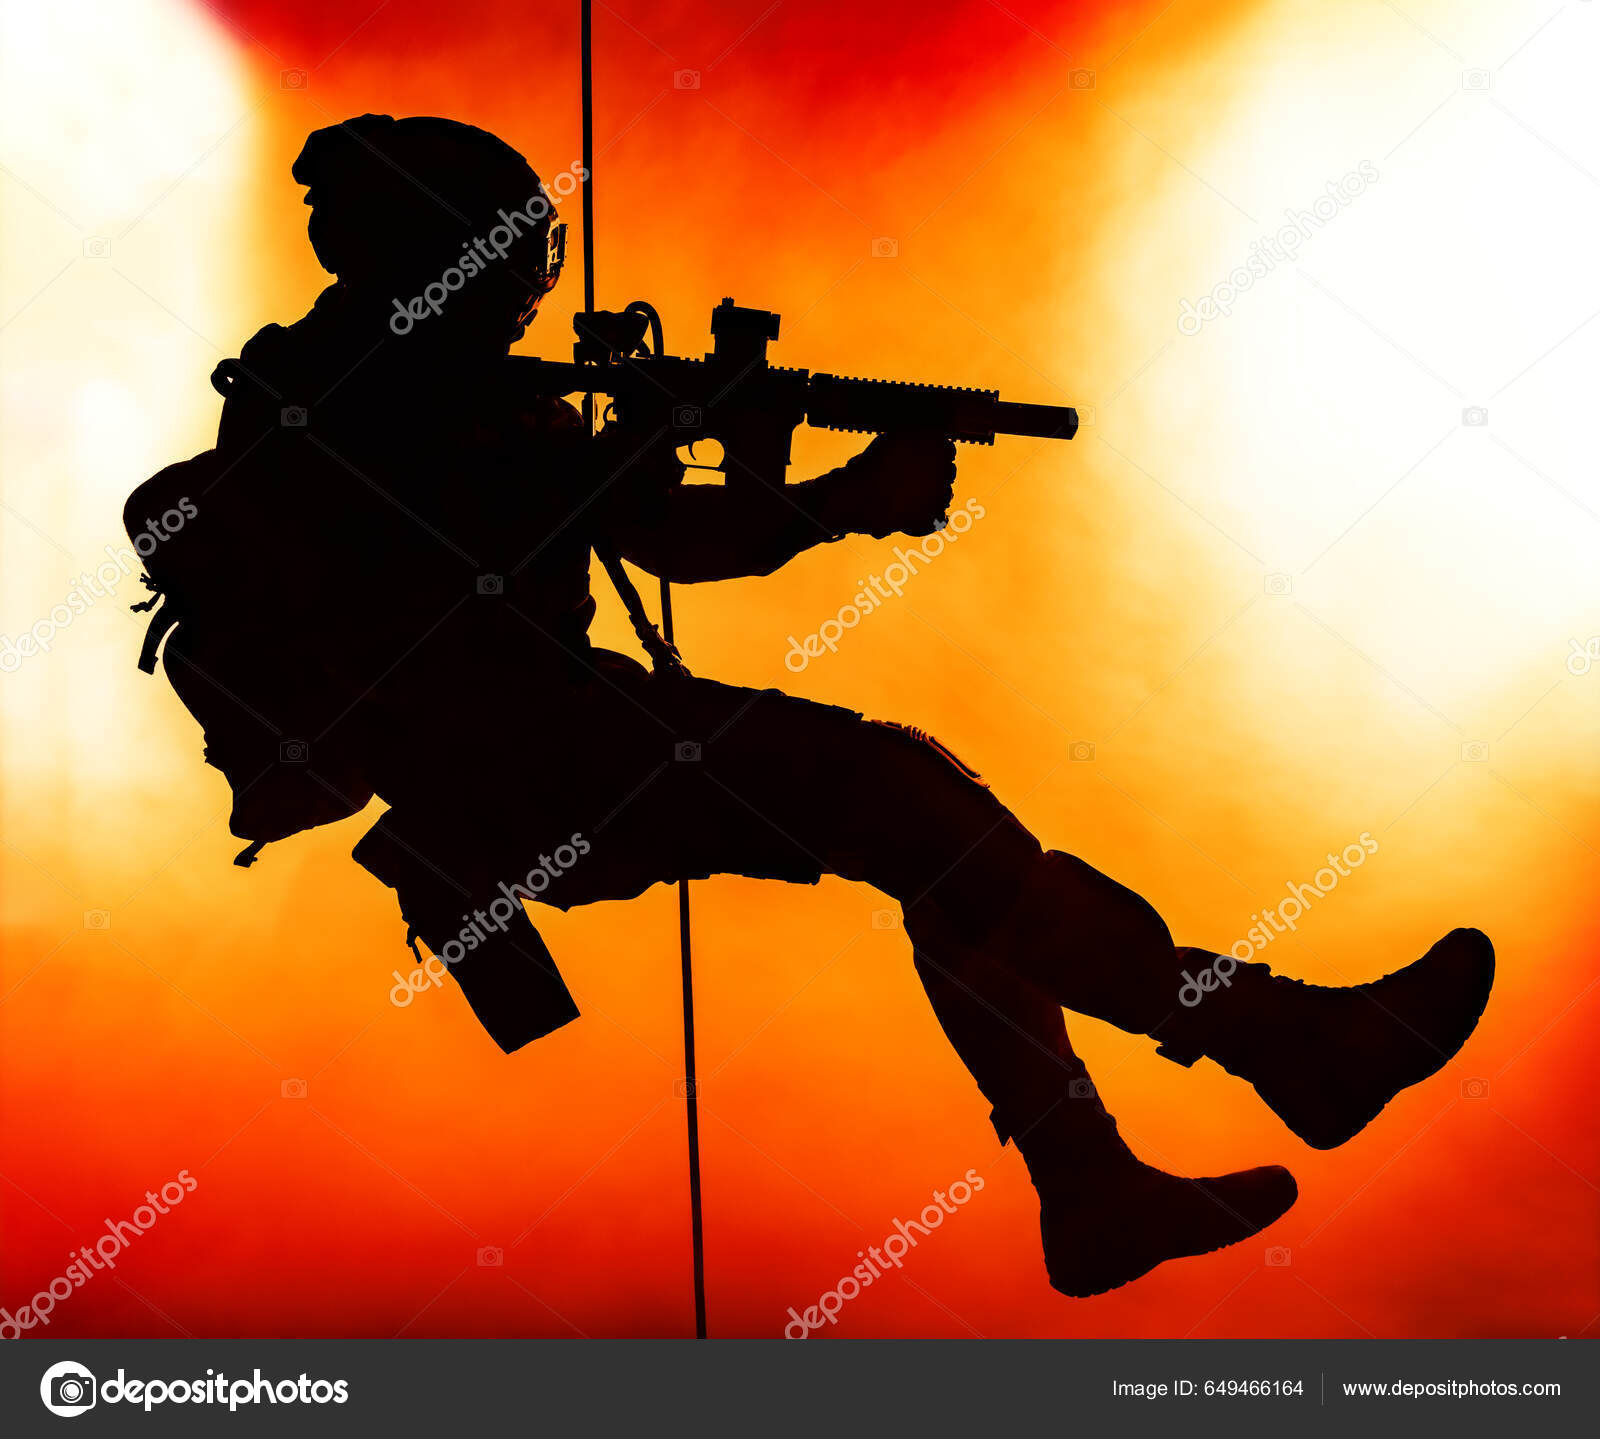 Silhouette Police Officer Tactical Gear Descending Height Rope Exercises  Weapons Stock Photo by ©zabelin 649466164